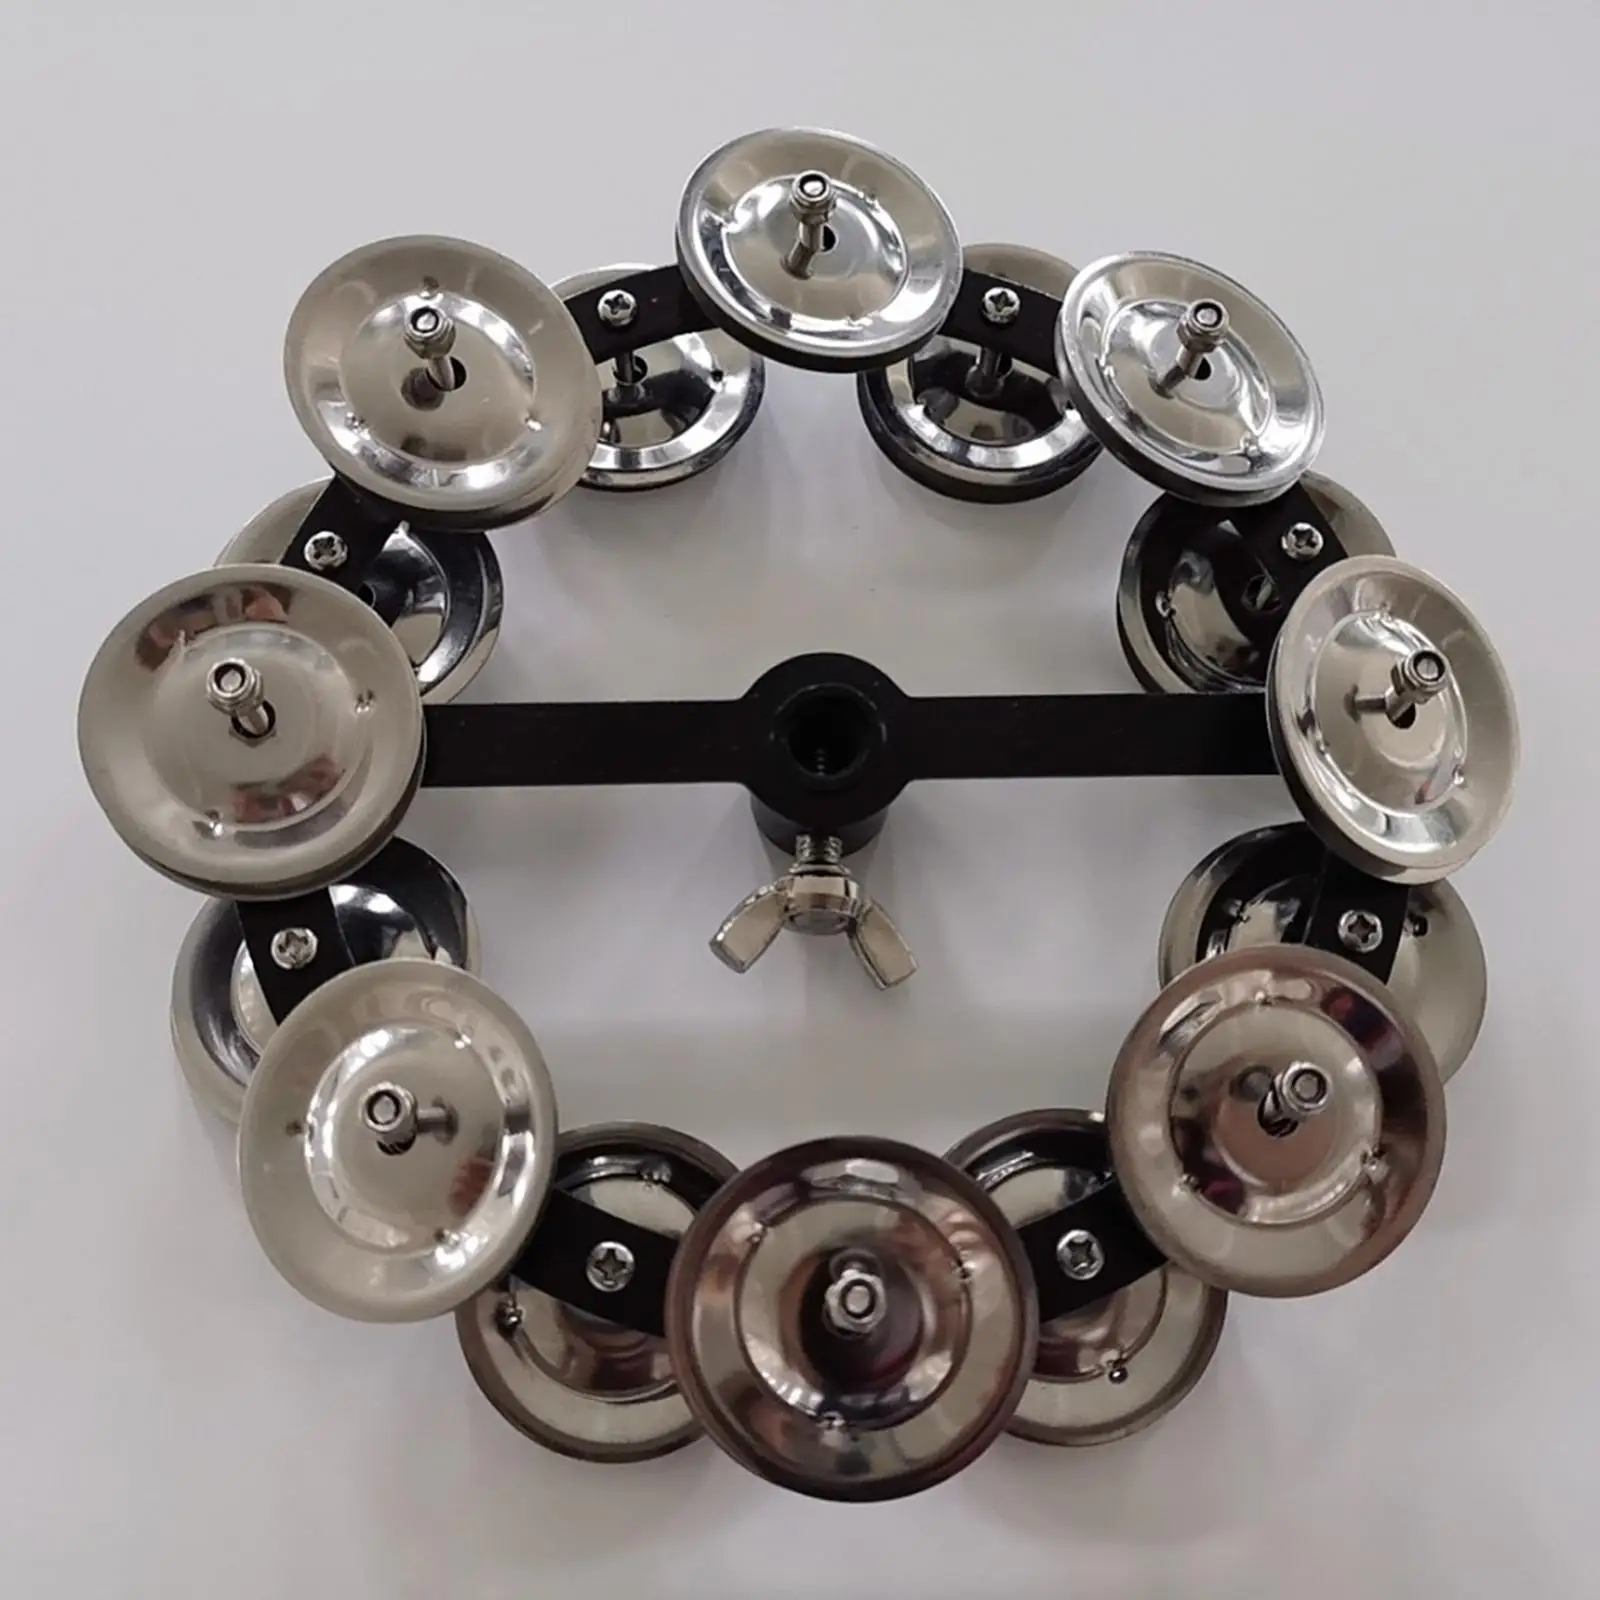 Hi Hat Tambourine Metal Shaker with Double Row for Band Kids Adults Party KTV